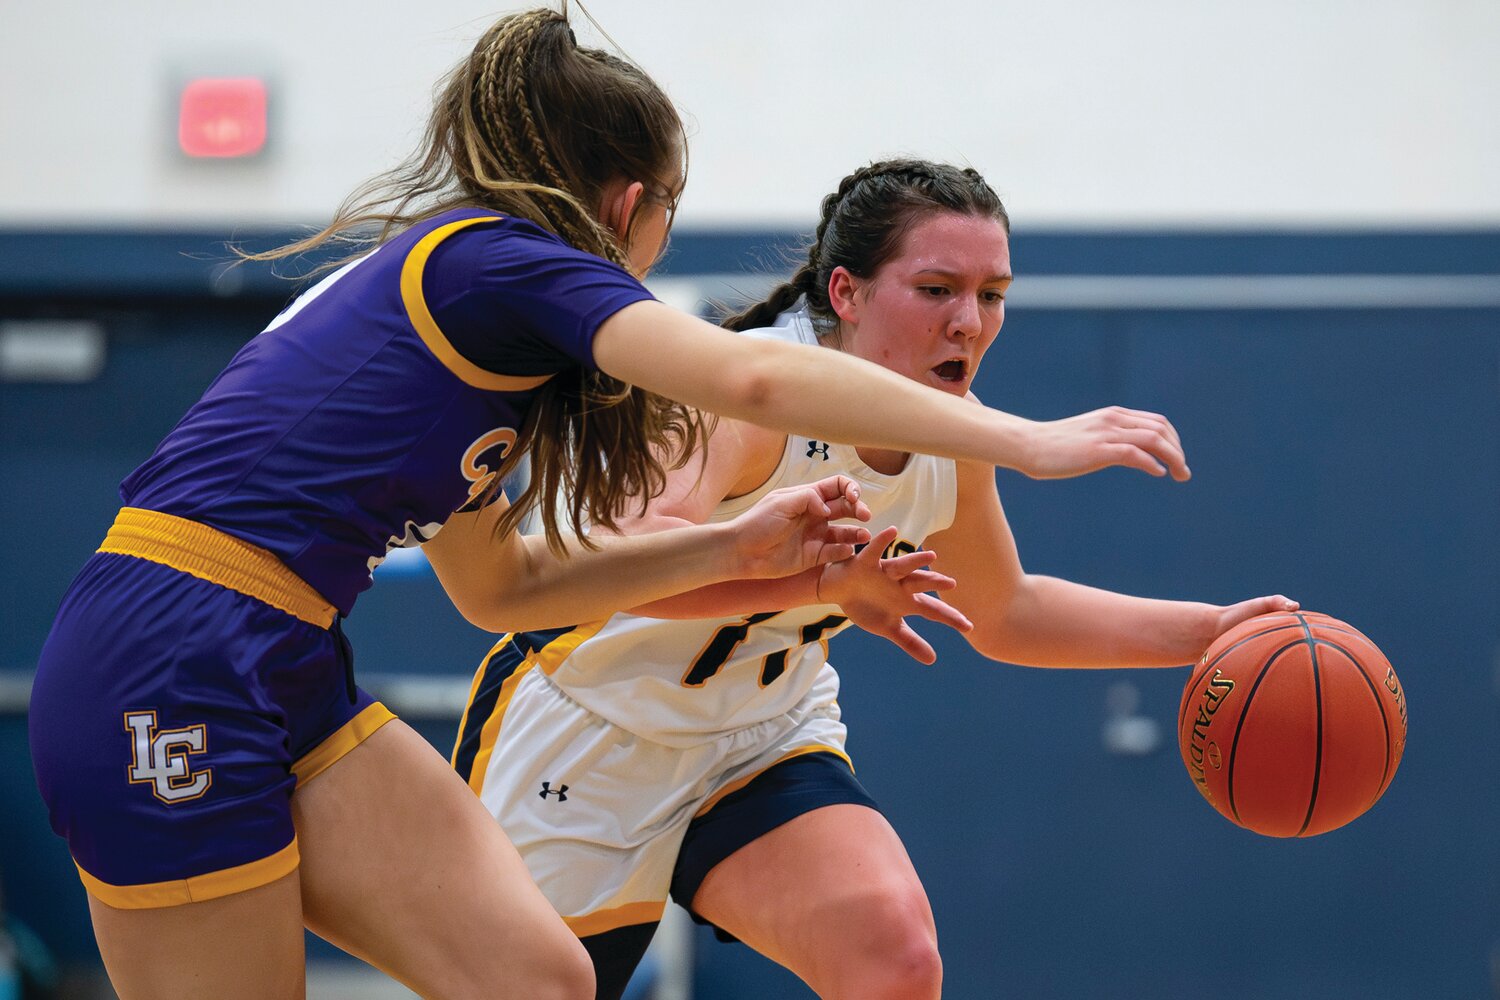 New Hope-Solebury’s Emily Wilson tries to get around the press defense of Lancaster Catholic’s Lily Lehman in the first quarter.